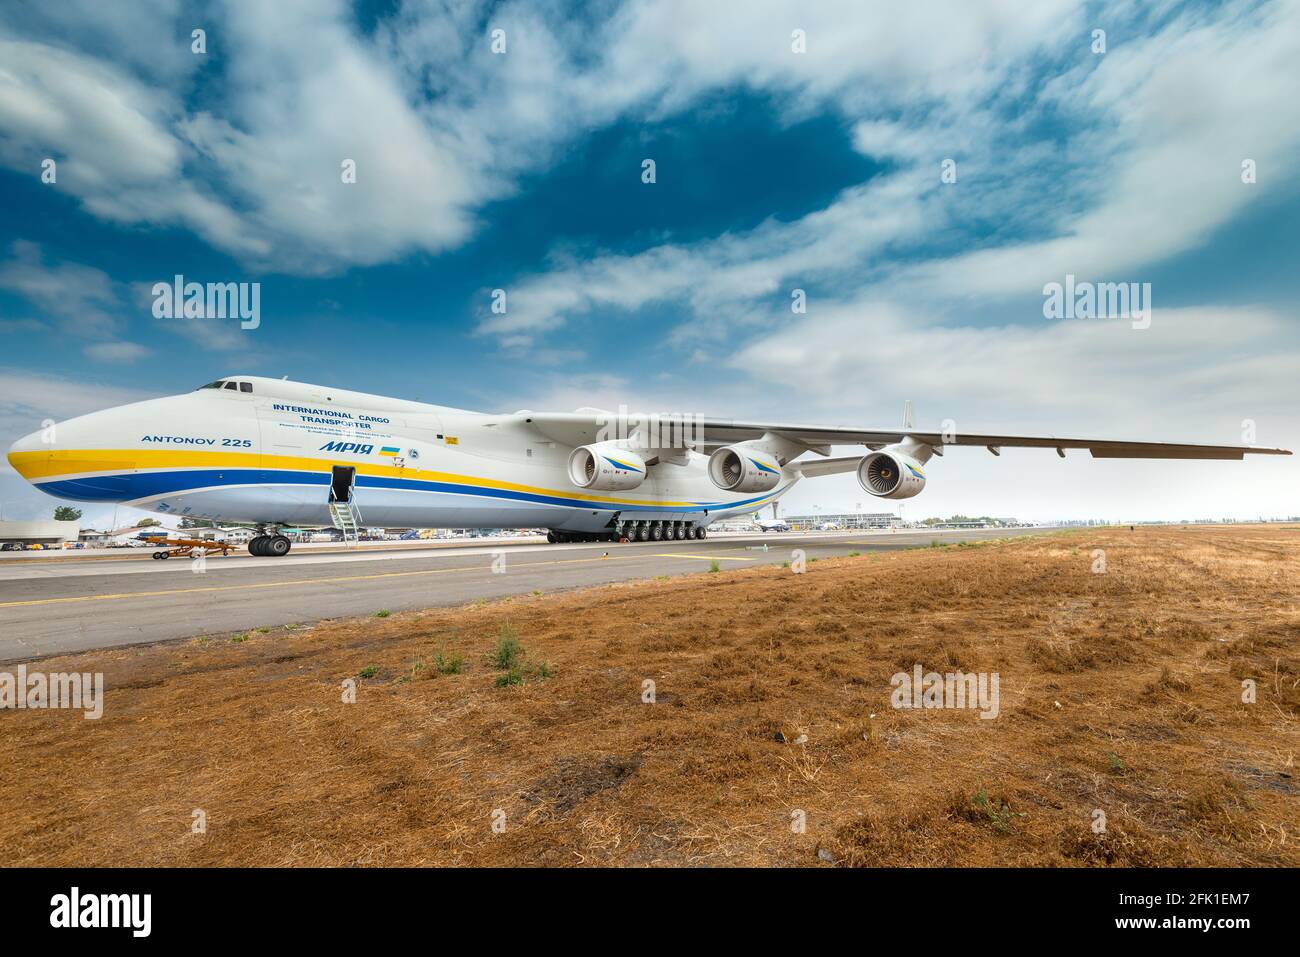 Santiago de Chile, Metropolitan Region, Chile, South America - The Antonov 225 also know as AN-225 and the biggest airplane in the Stock Photo